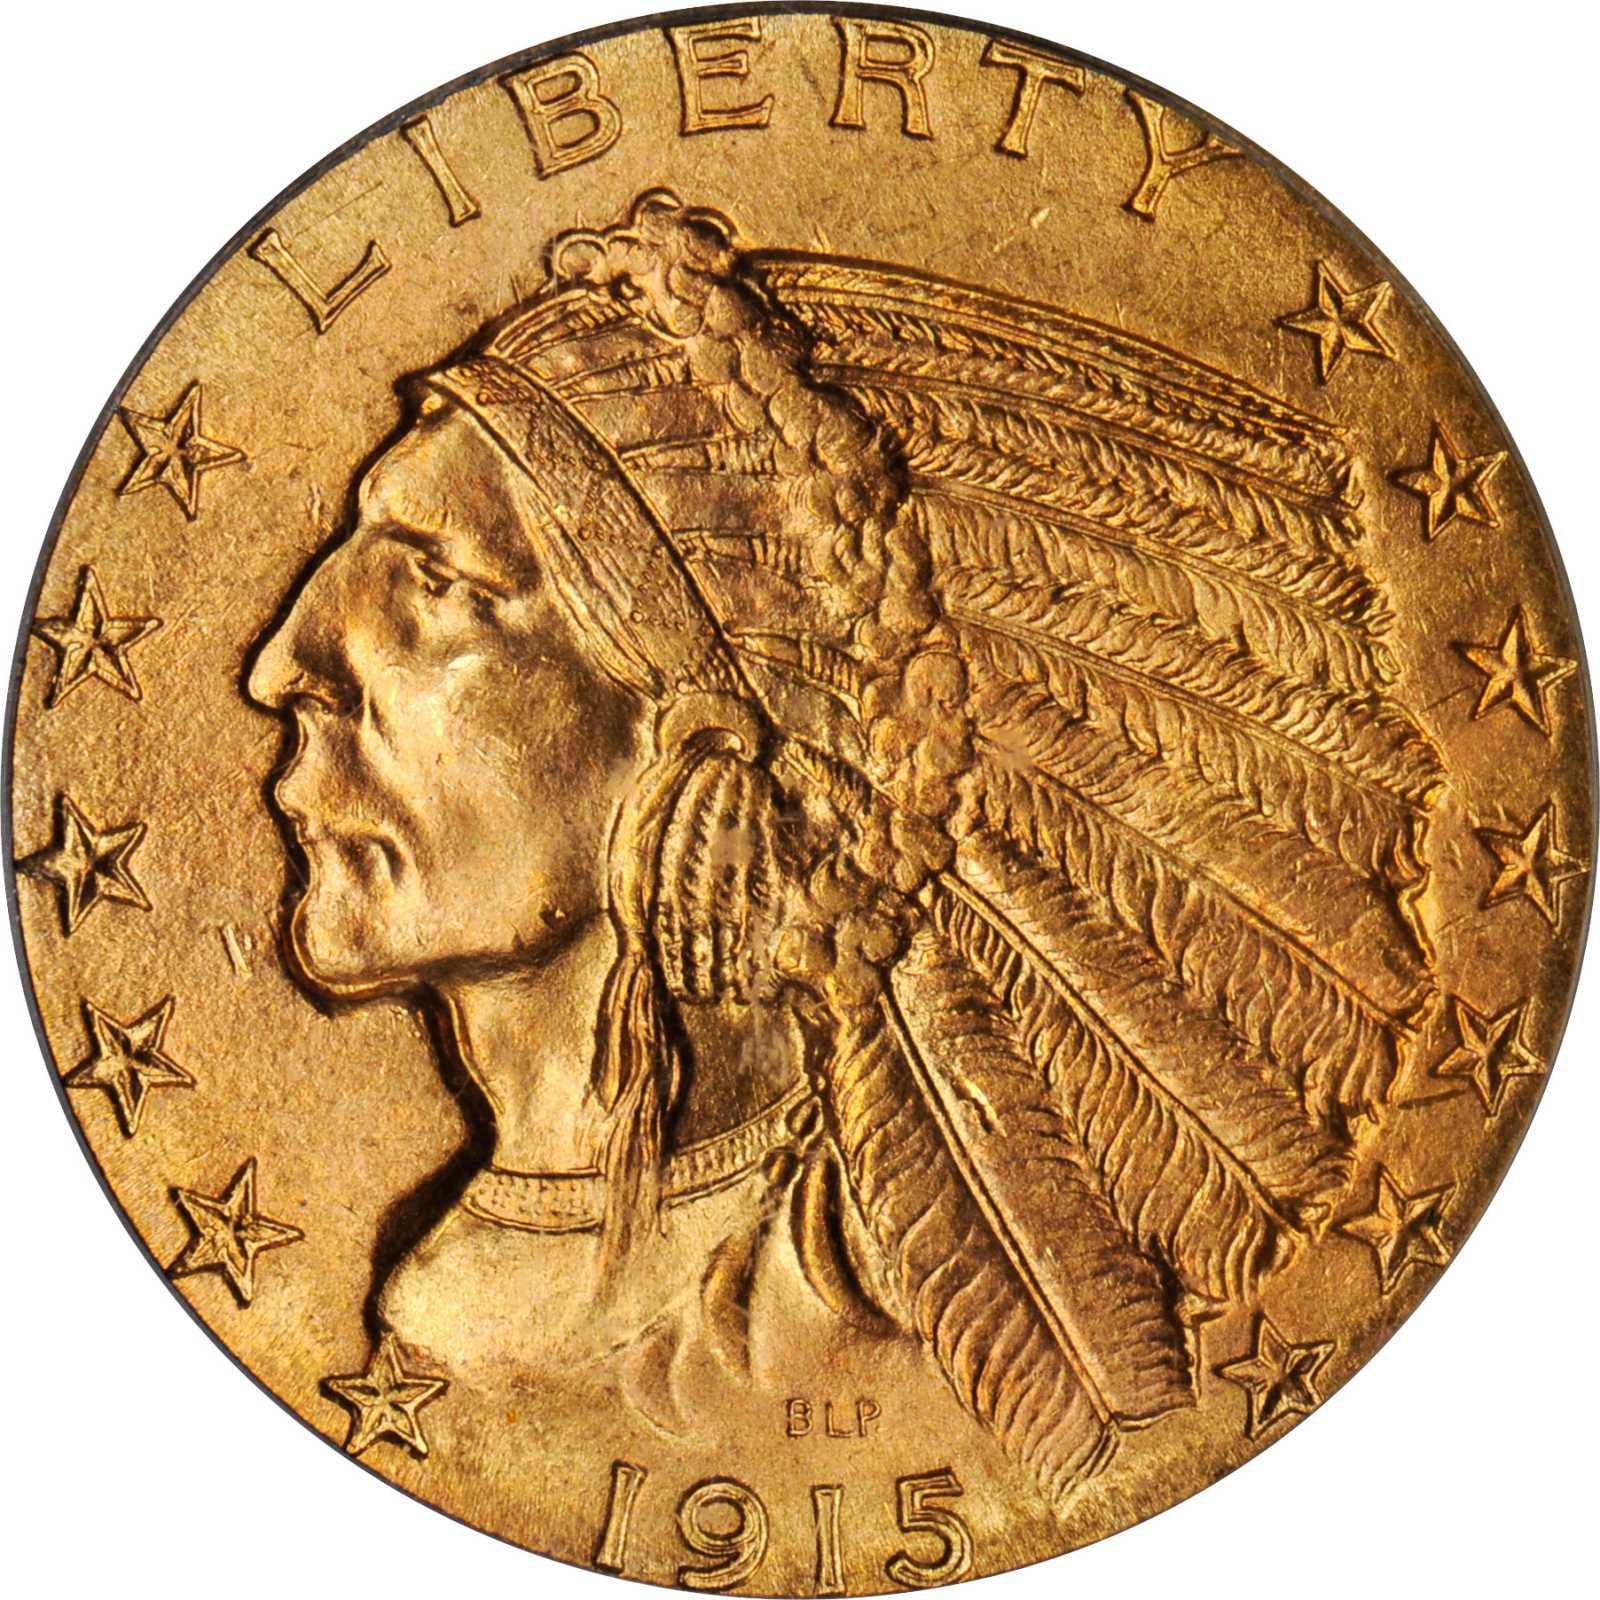 American 1915 Indian collection commemorative coins ation souve 